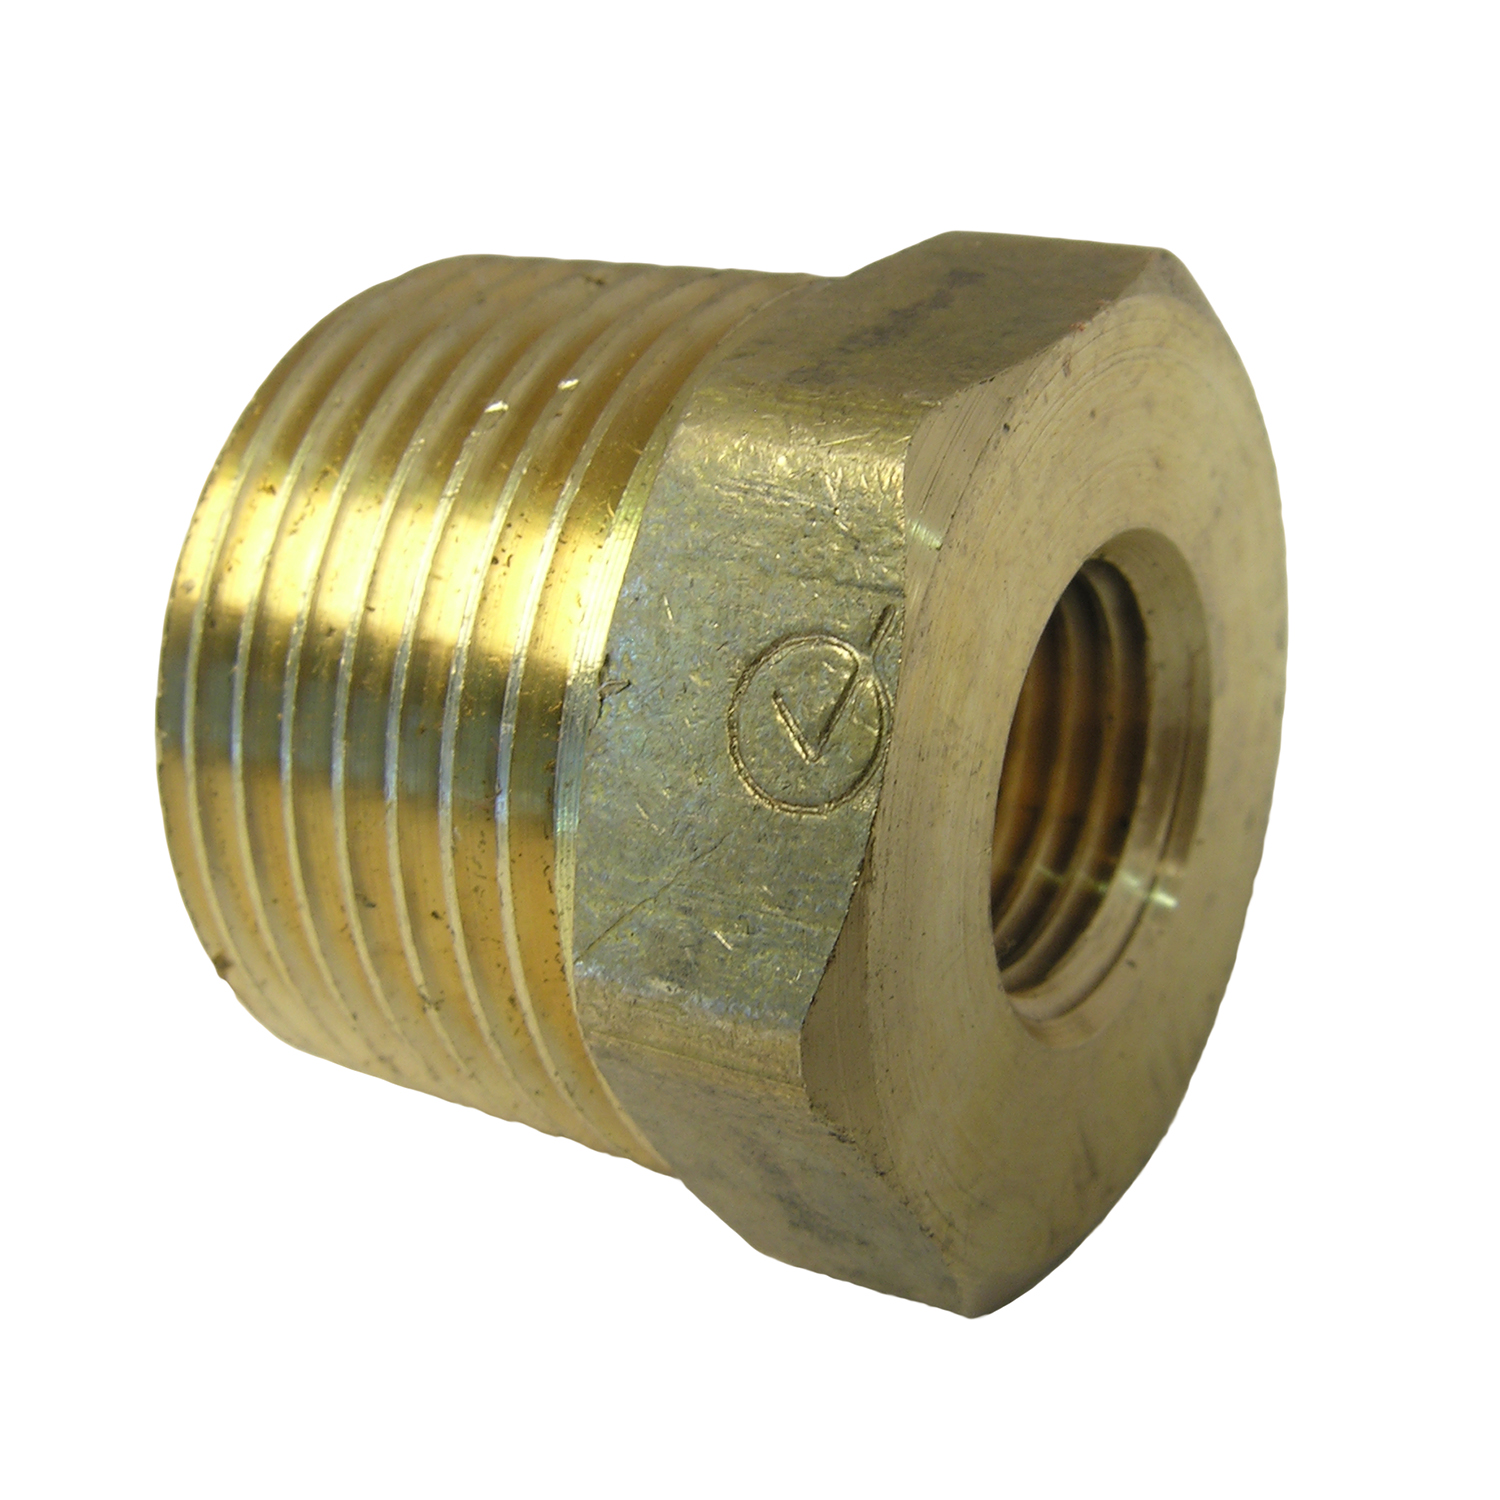 17-9255 Hex Pipe Bushing, 3/4 x 1/4 in, MPT x FPT, Brass, 125 psi Pressure